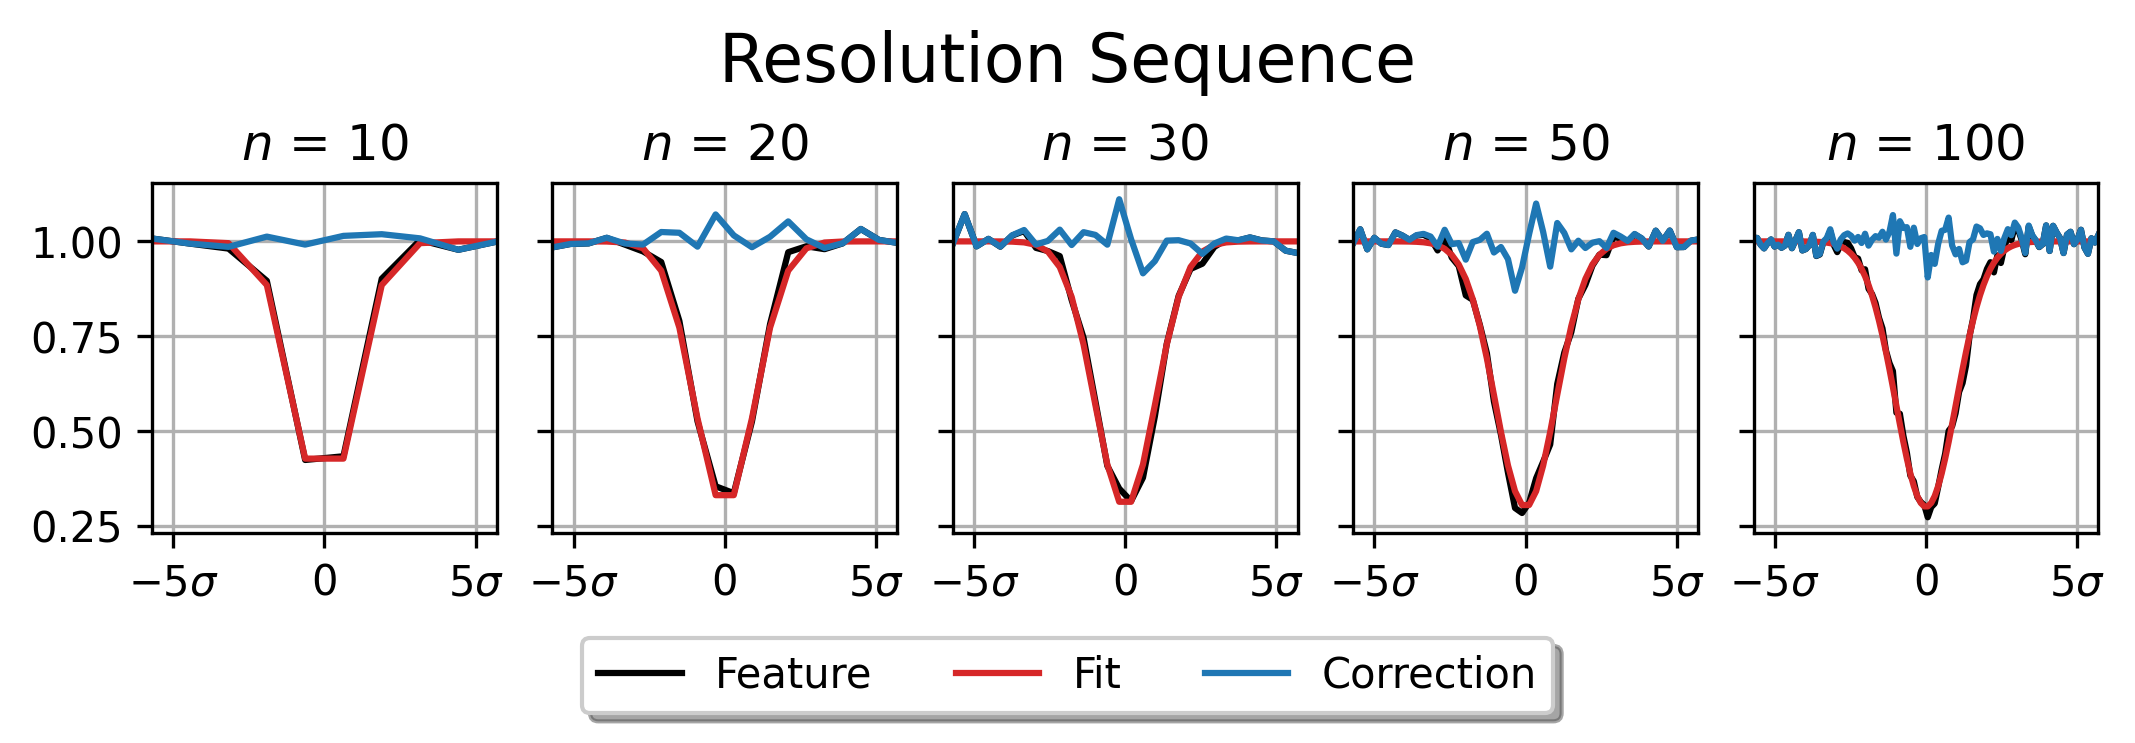 Resolution Sequence